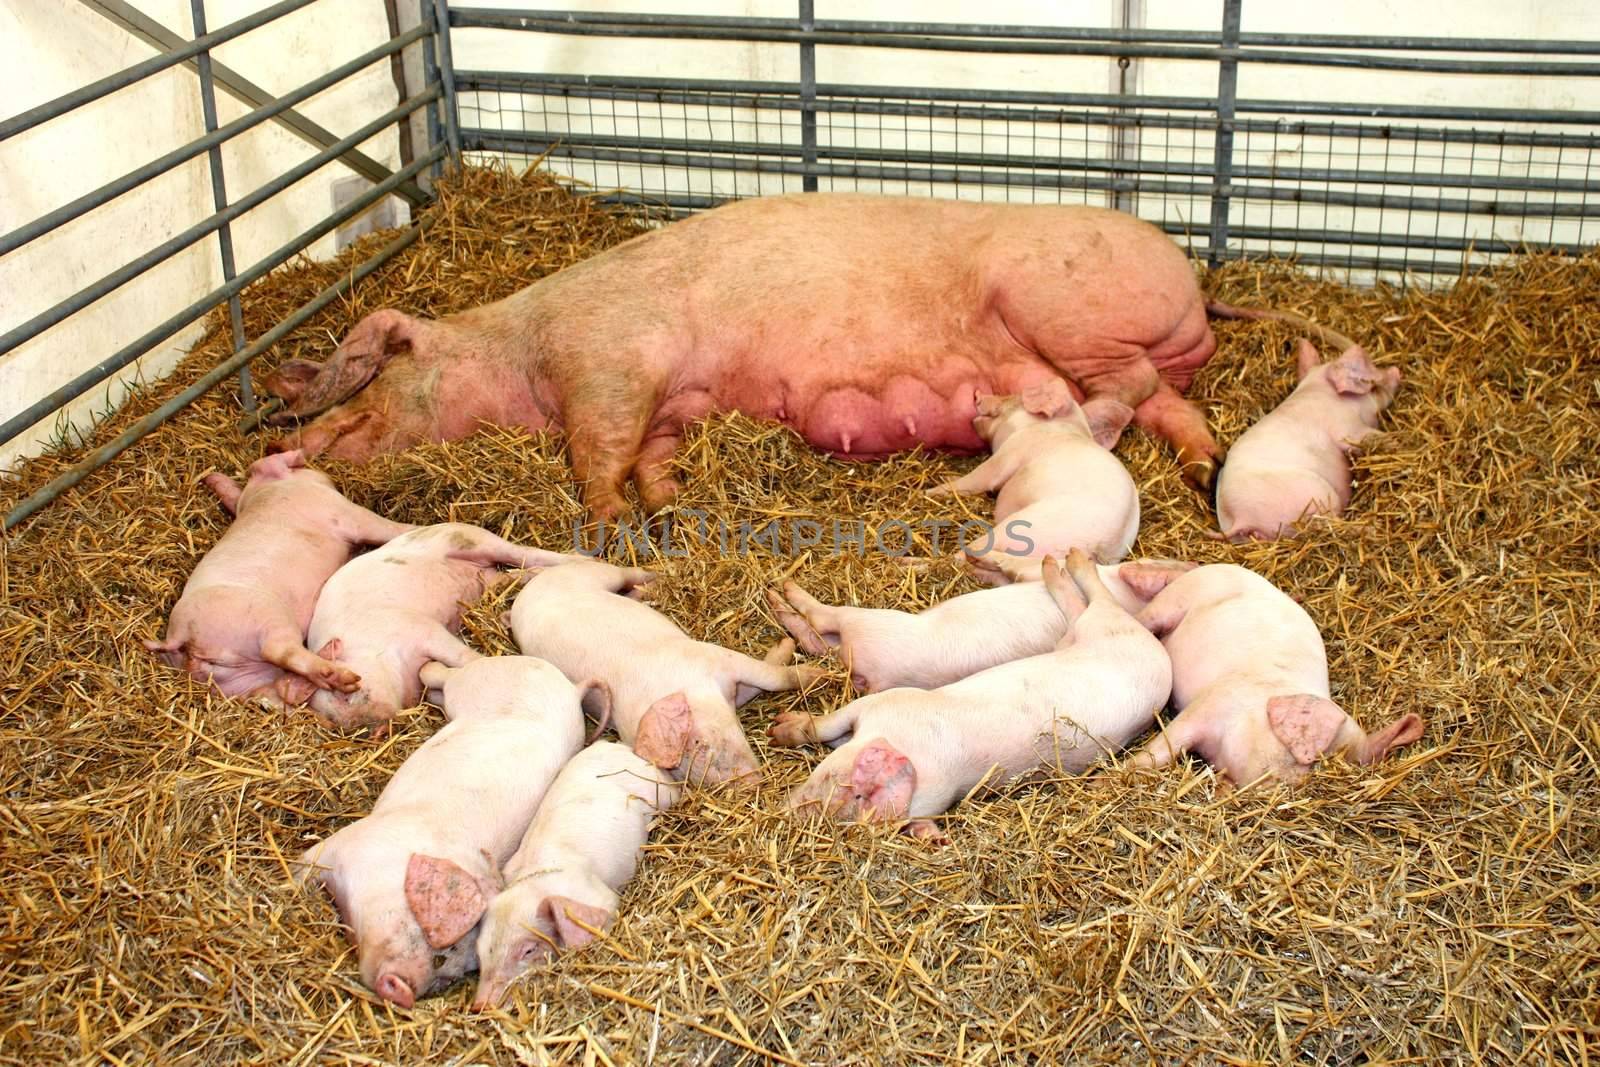 Pig and Piglets. by daseaford